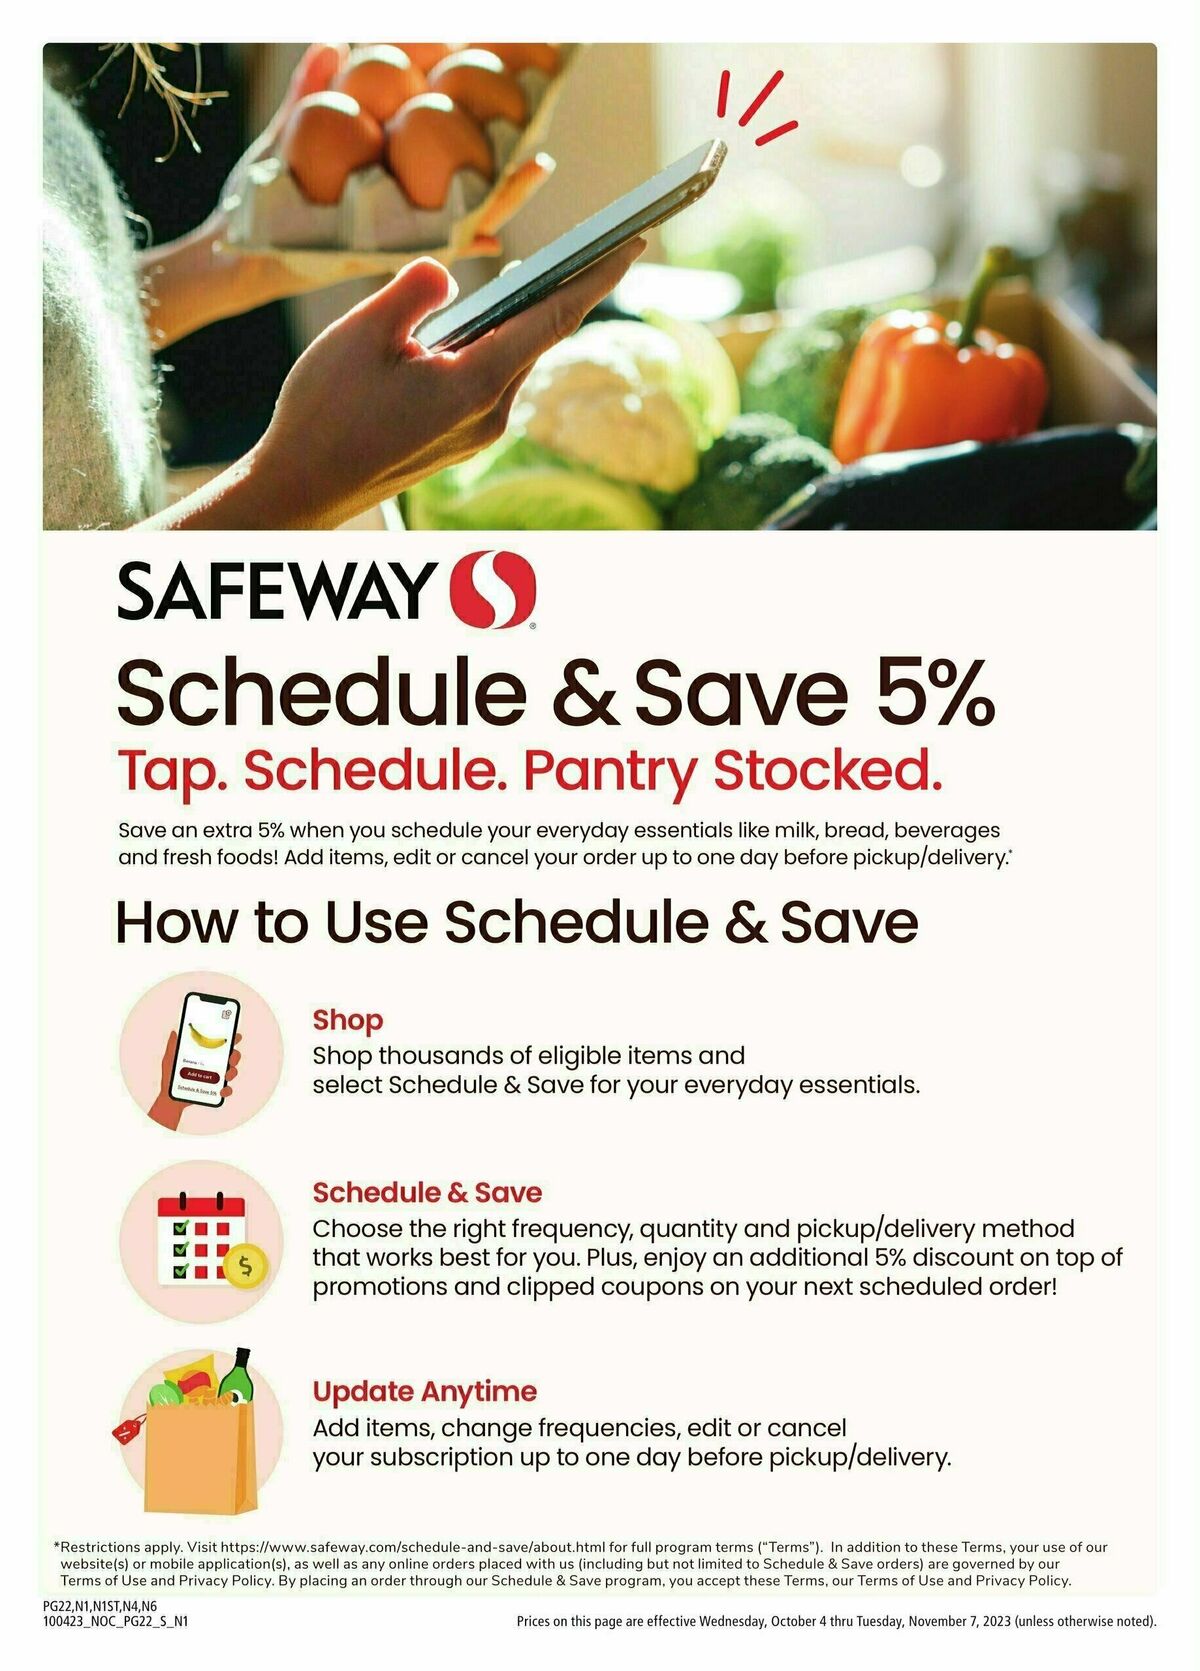 Safeway Big Book of Savings Weekly Ad from October 4